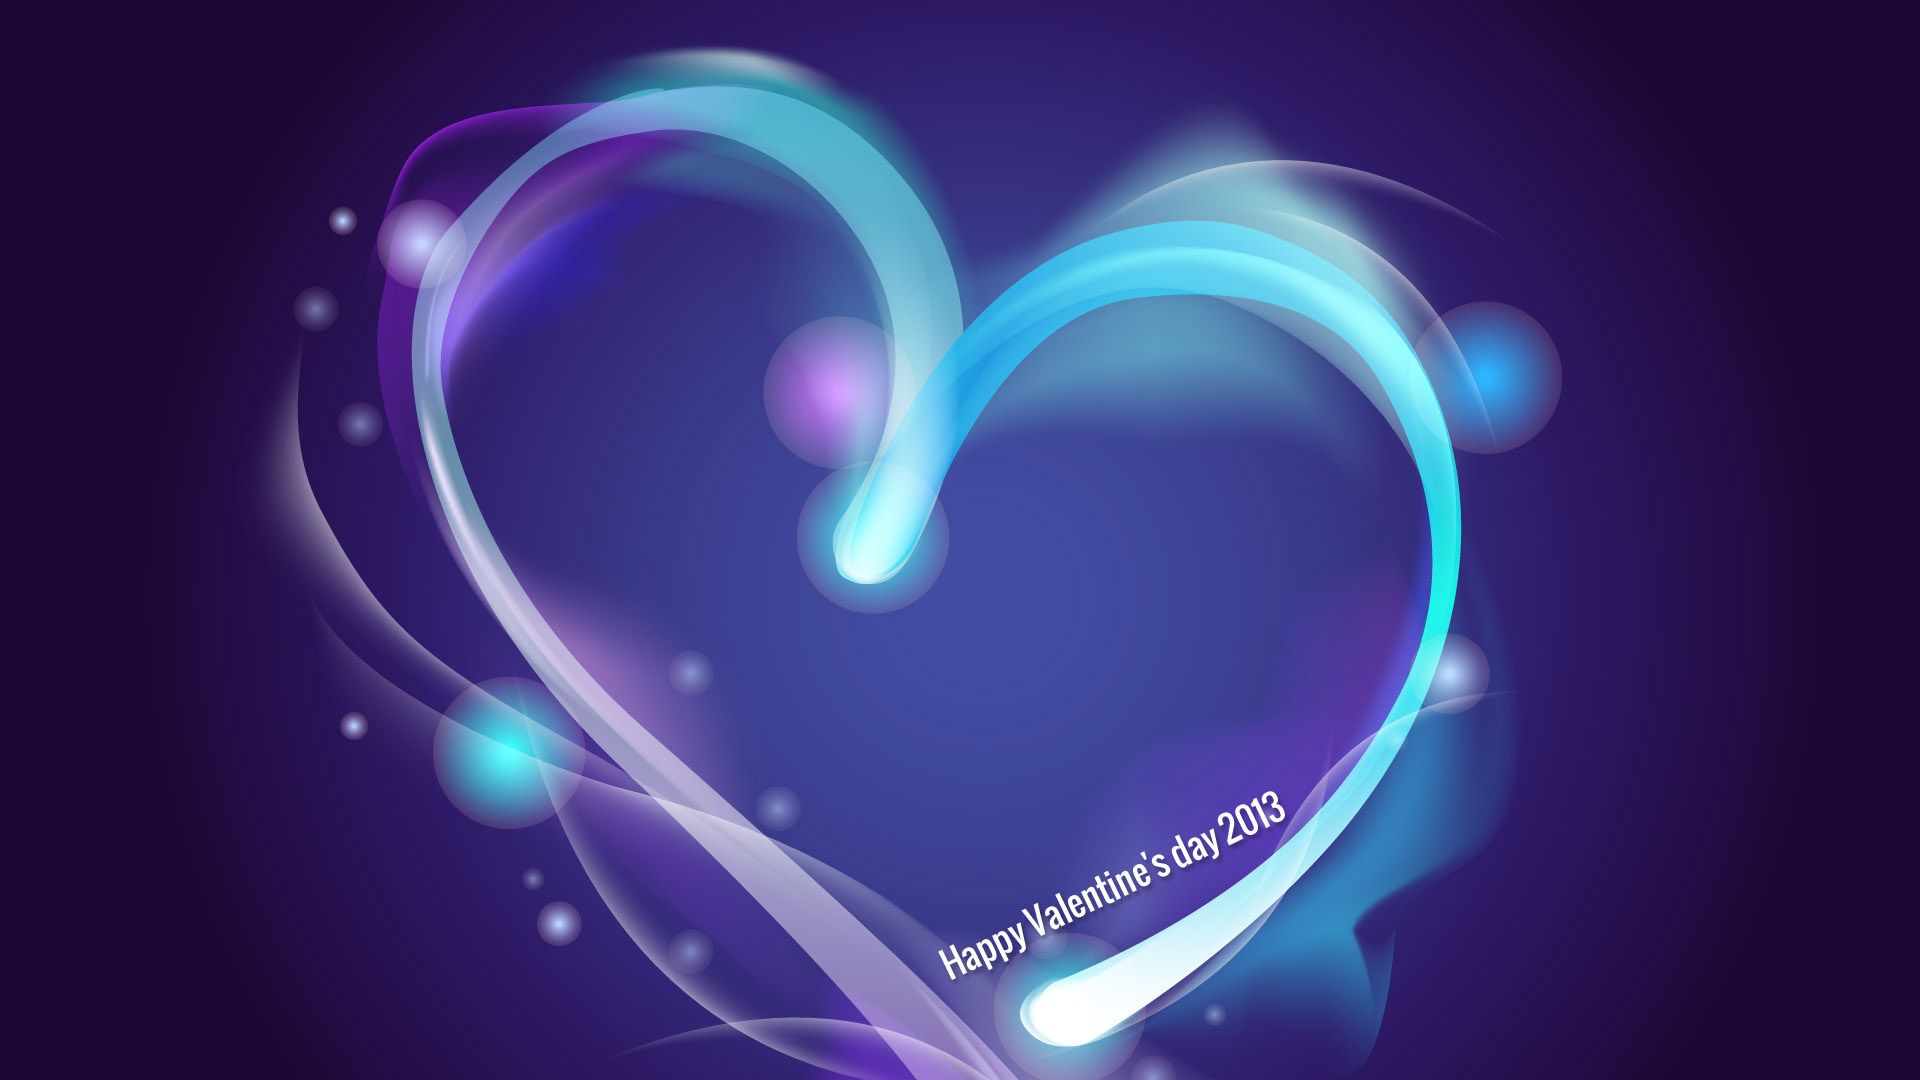 Wallpaper Valentines Day Heart Abstract Purple And Blue Heart